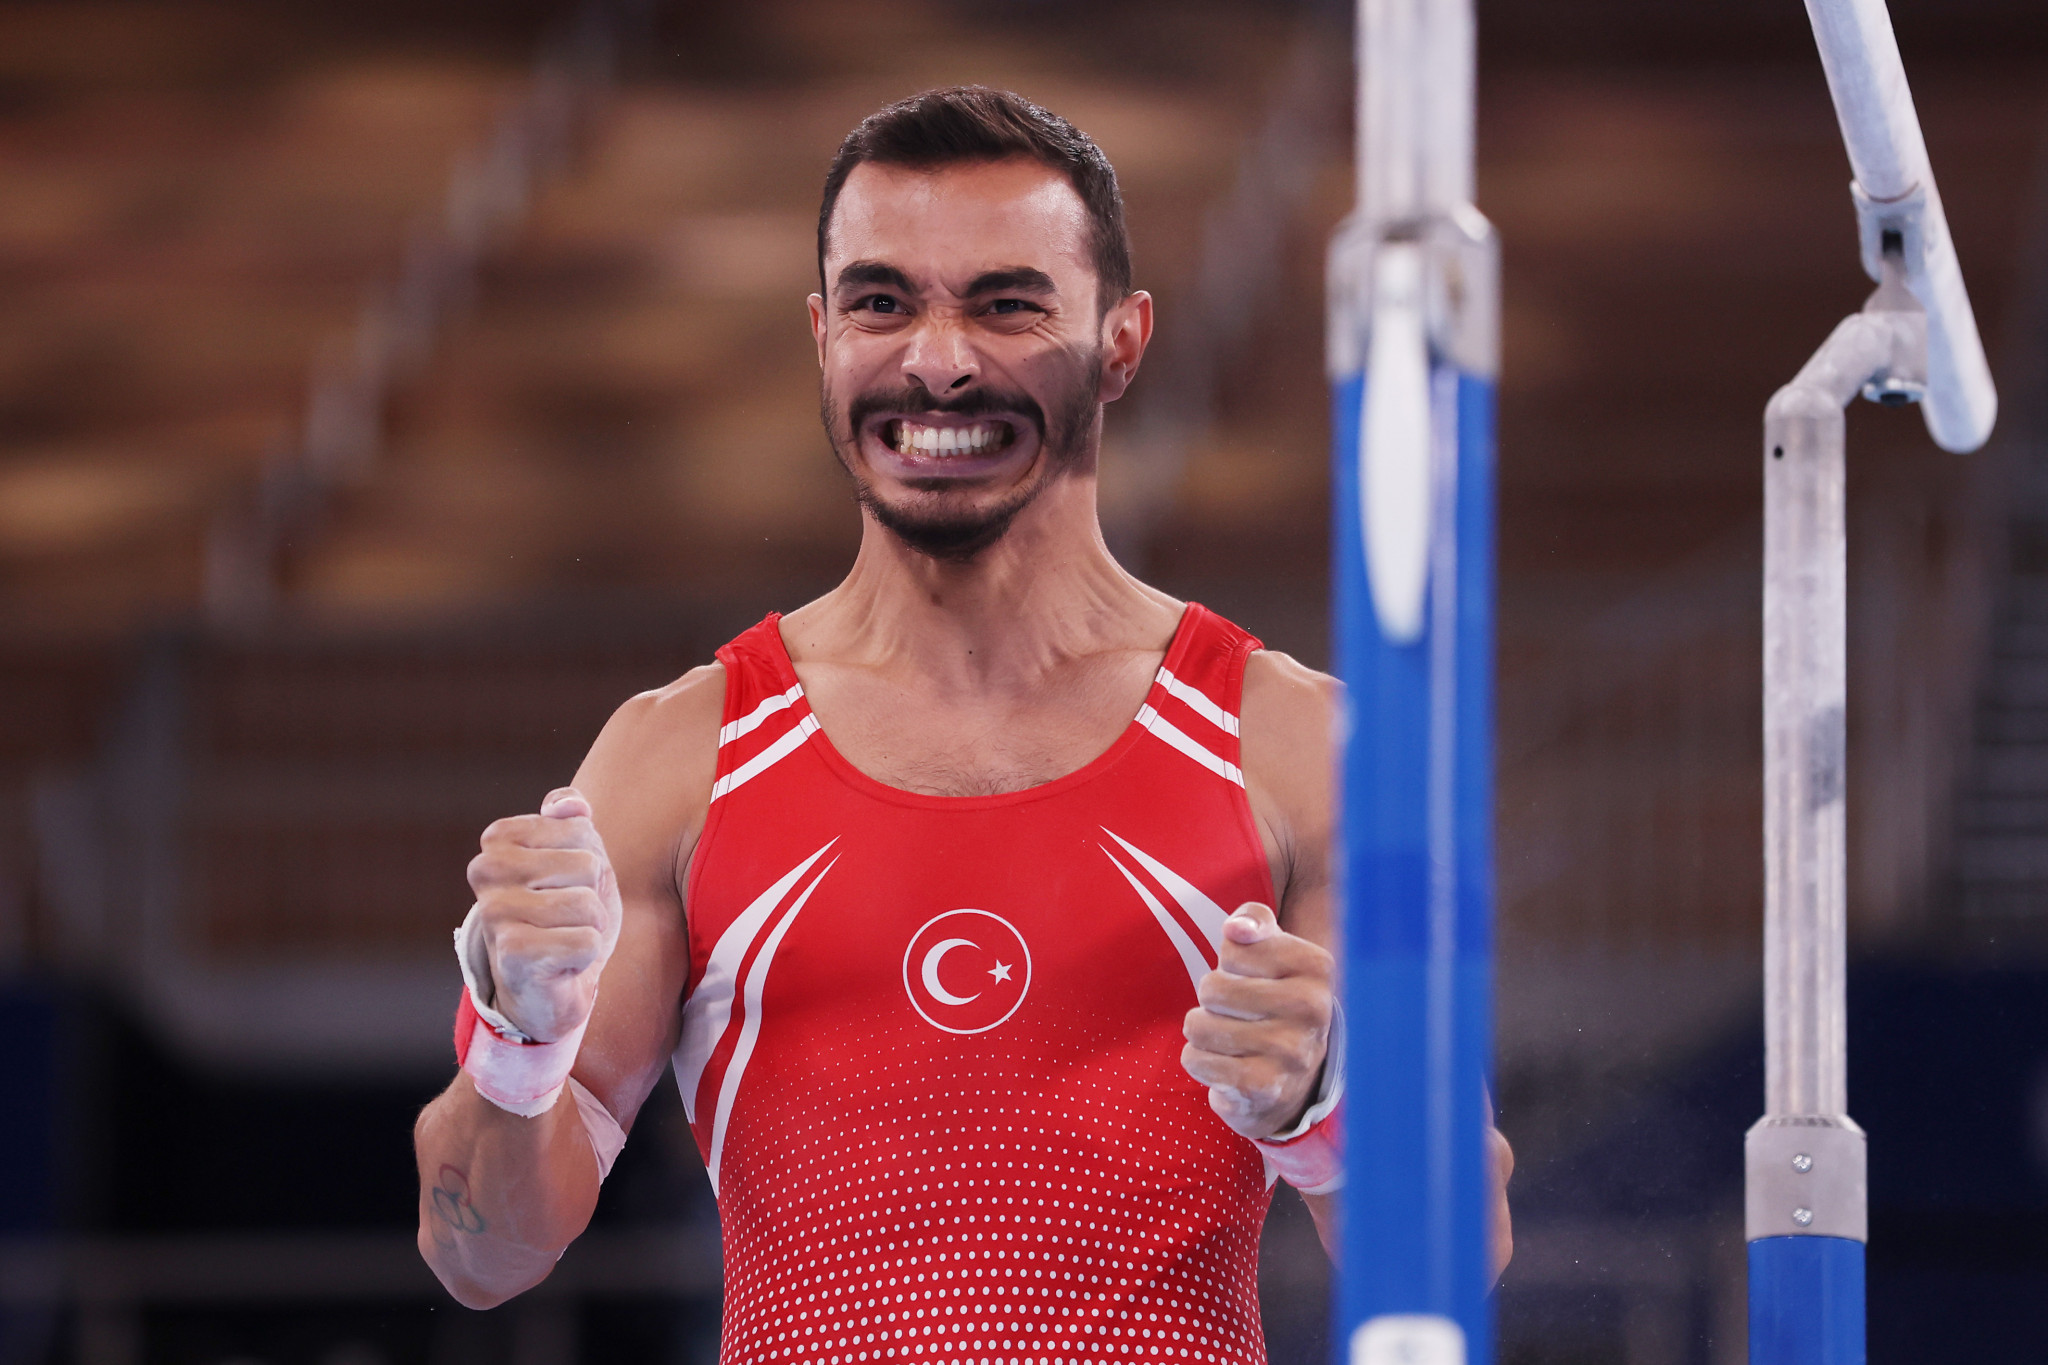 Ferhat Arican believes he is ready to compete for medals at the Artistic Gymnastics World Challenge Cup ©Getty Images